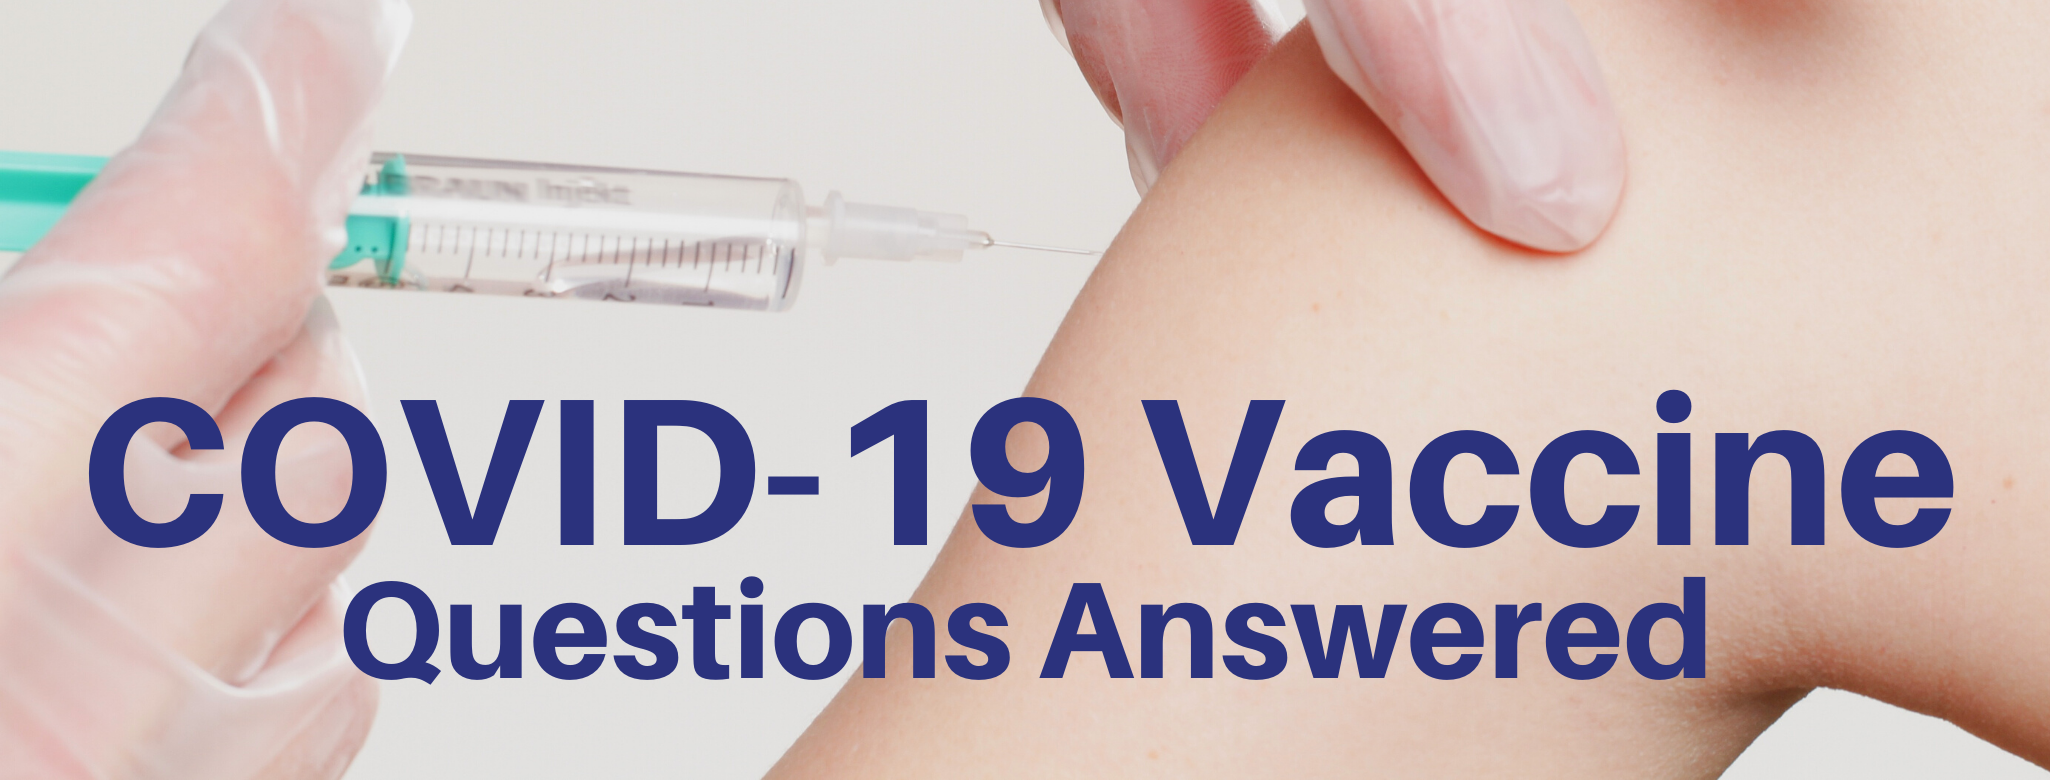 Header for COVID19 vaccine questions answered in this blog on February 2021